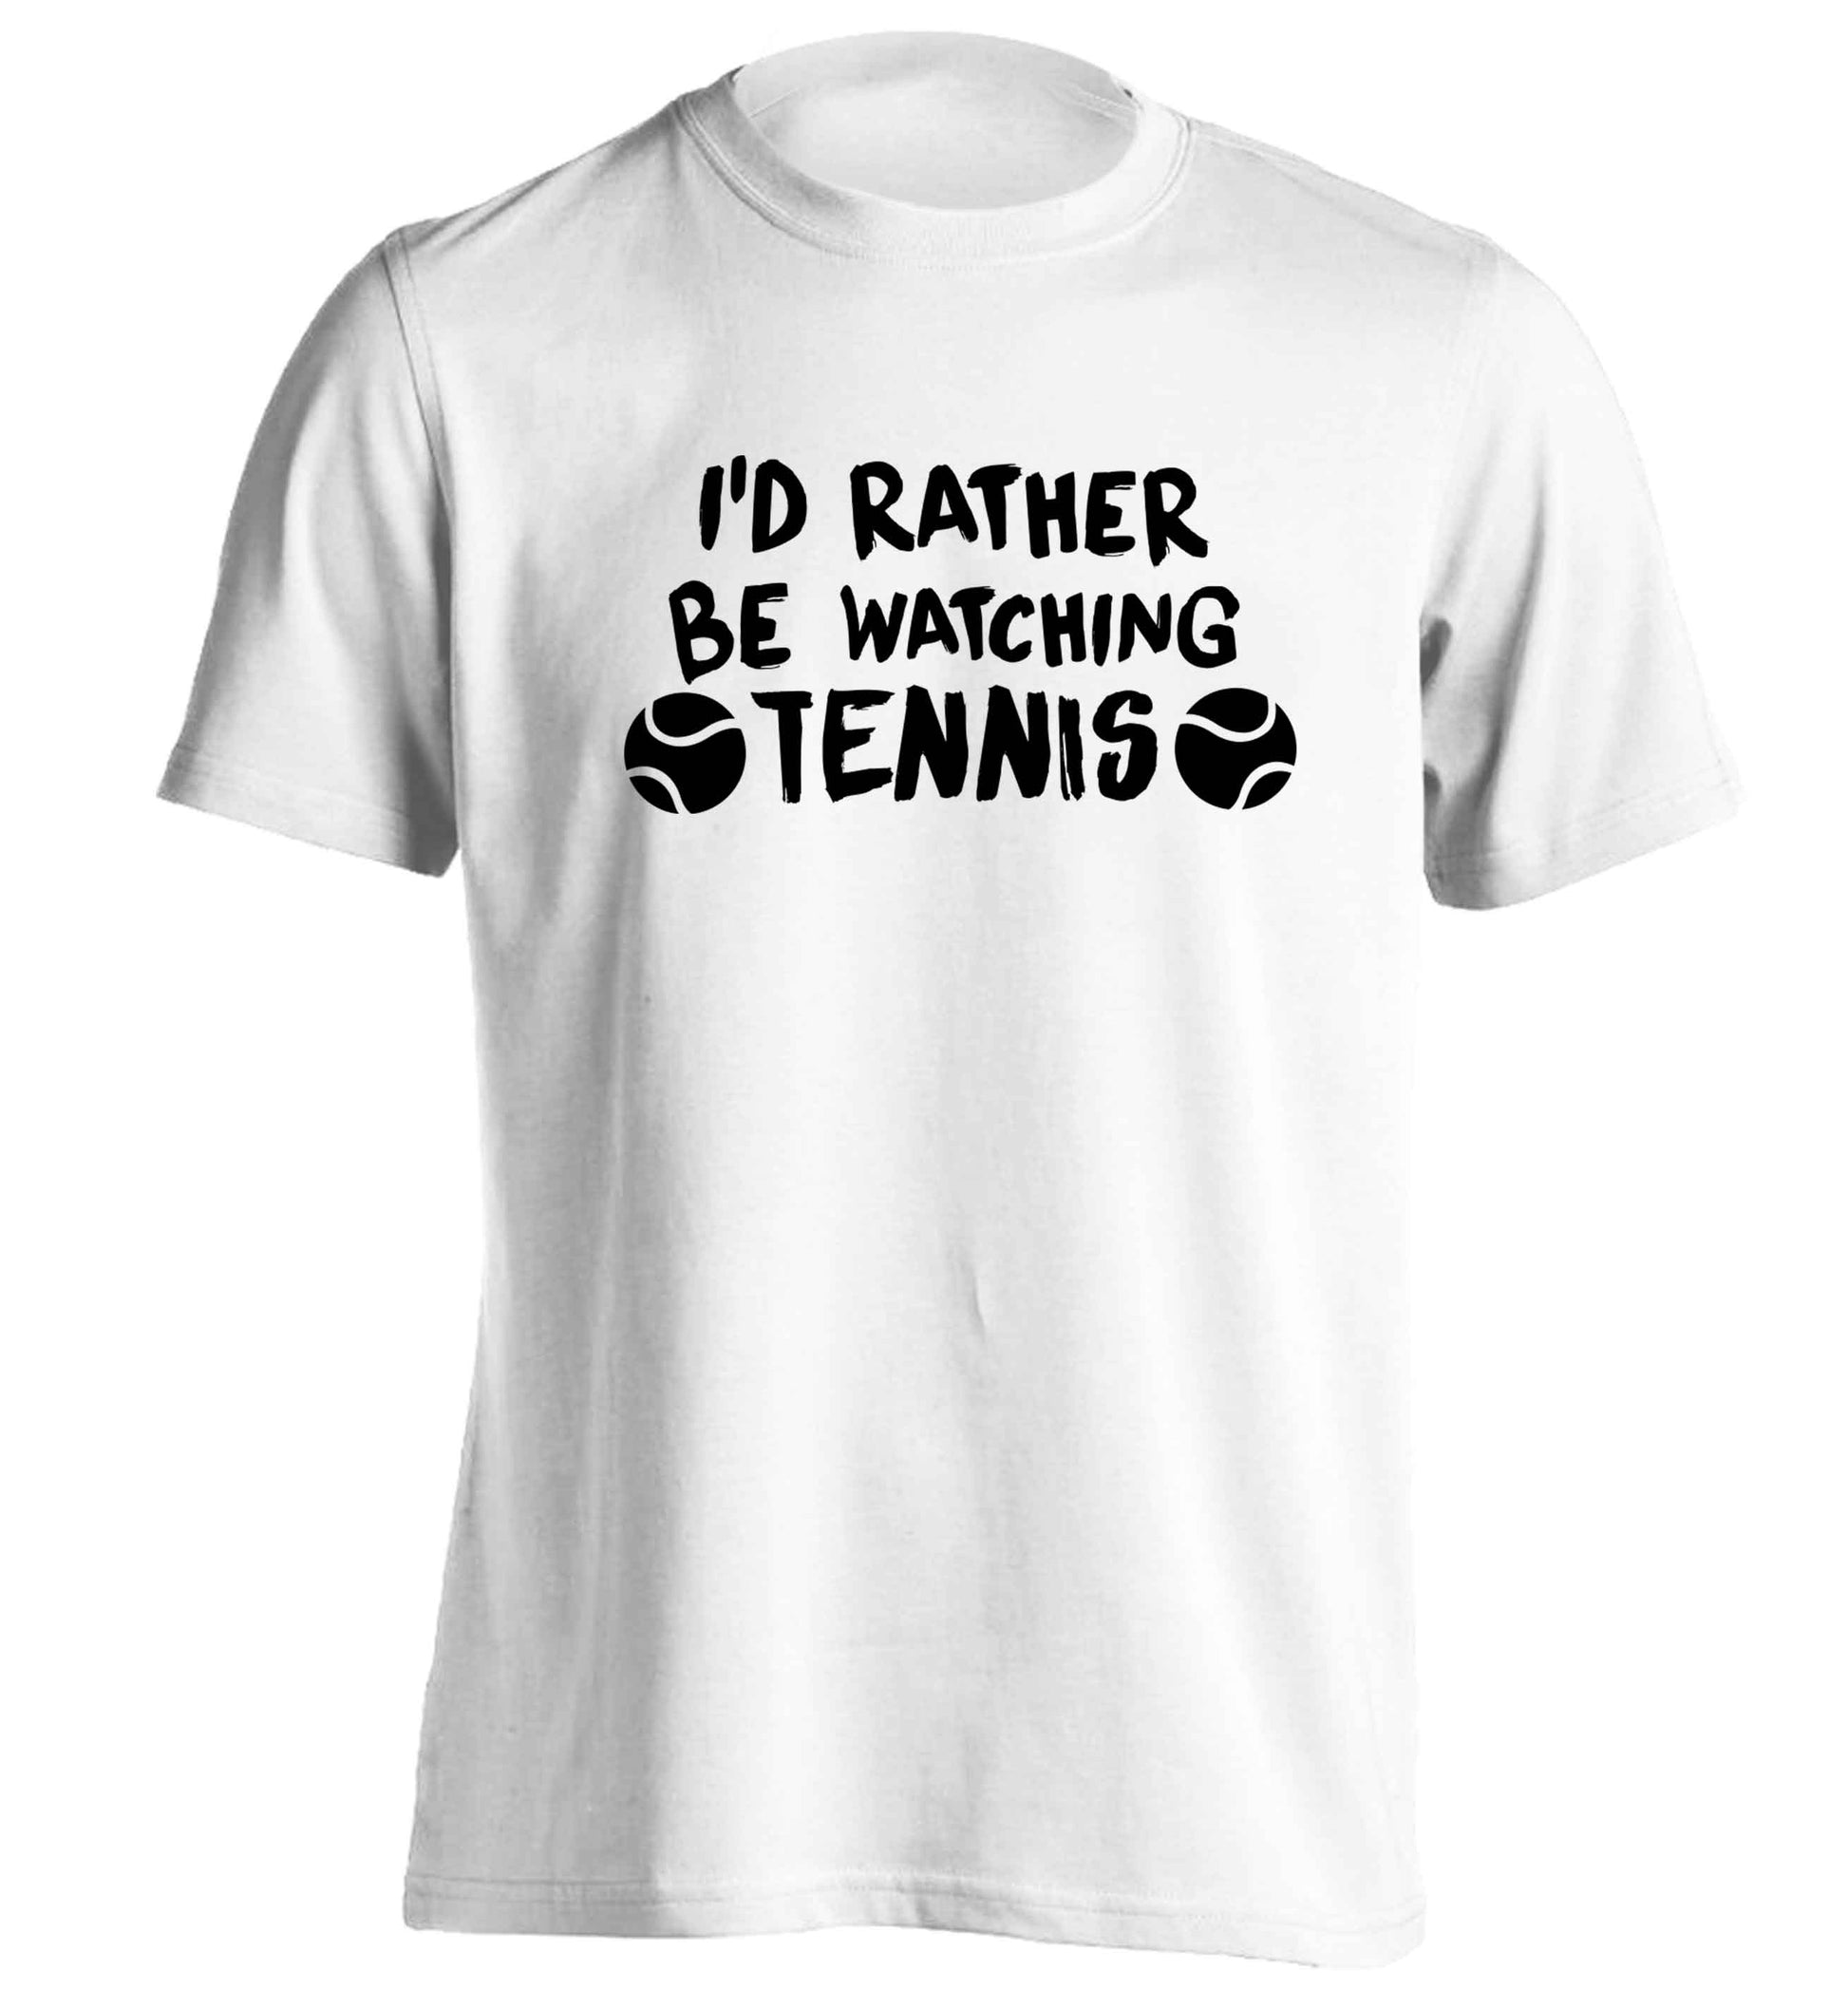 I'd rather be watching the tennis adults unisex white Tshirt 2XL